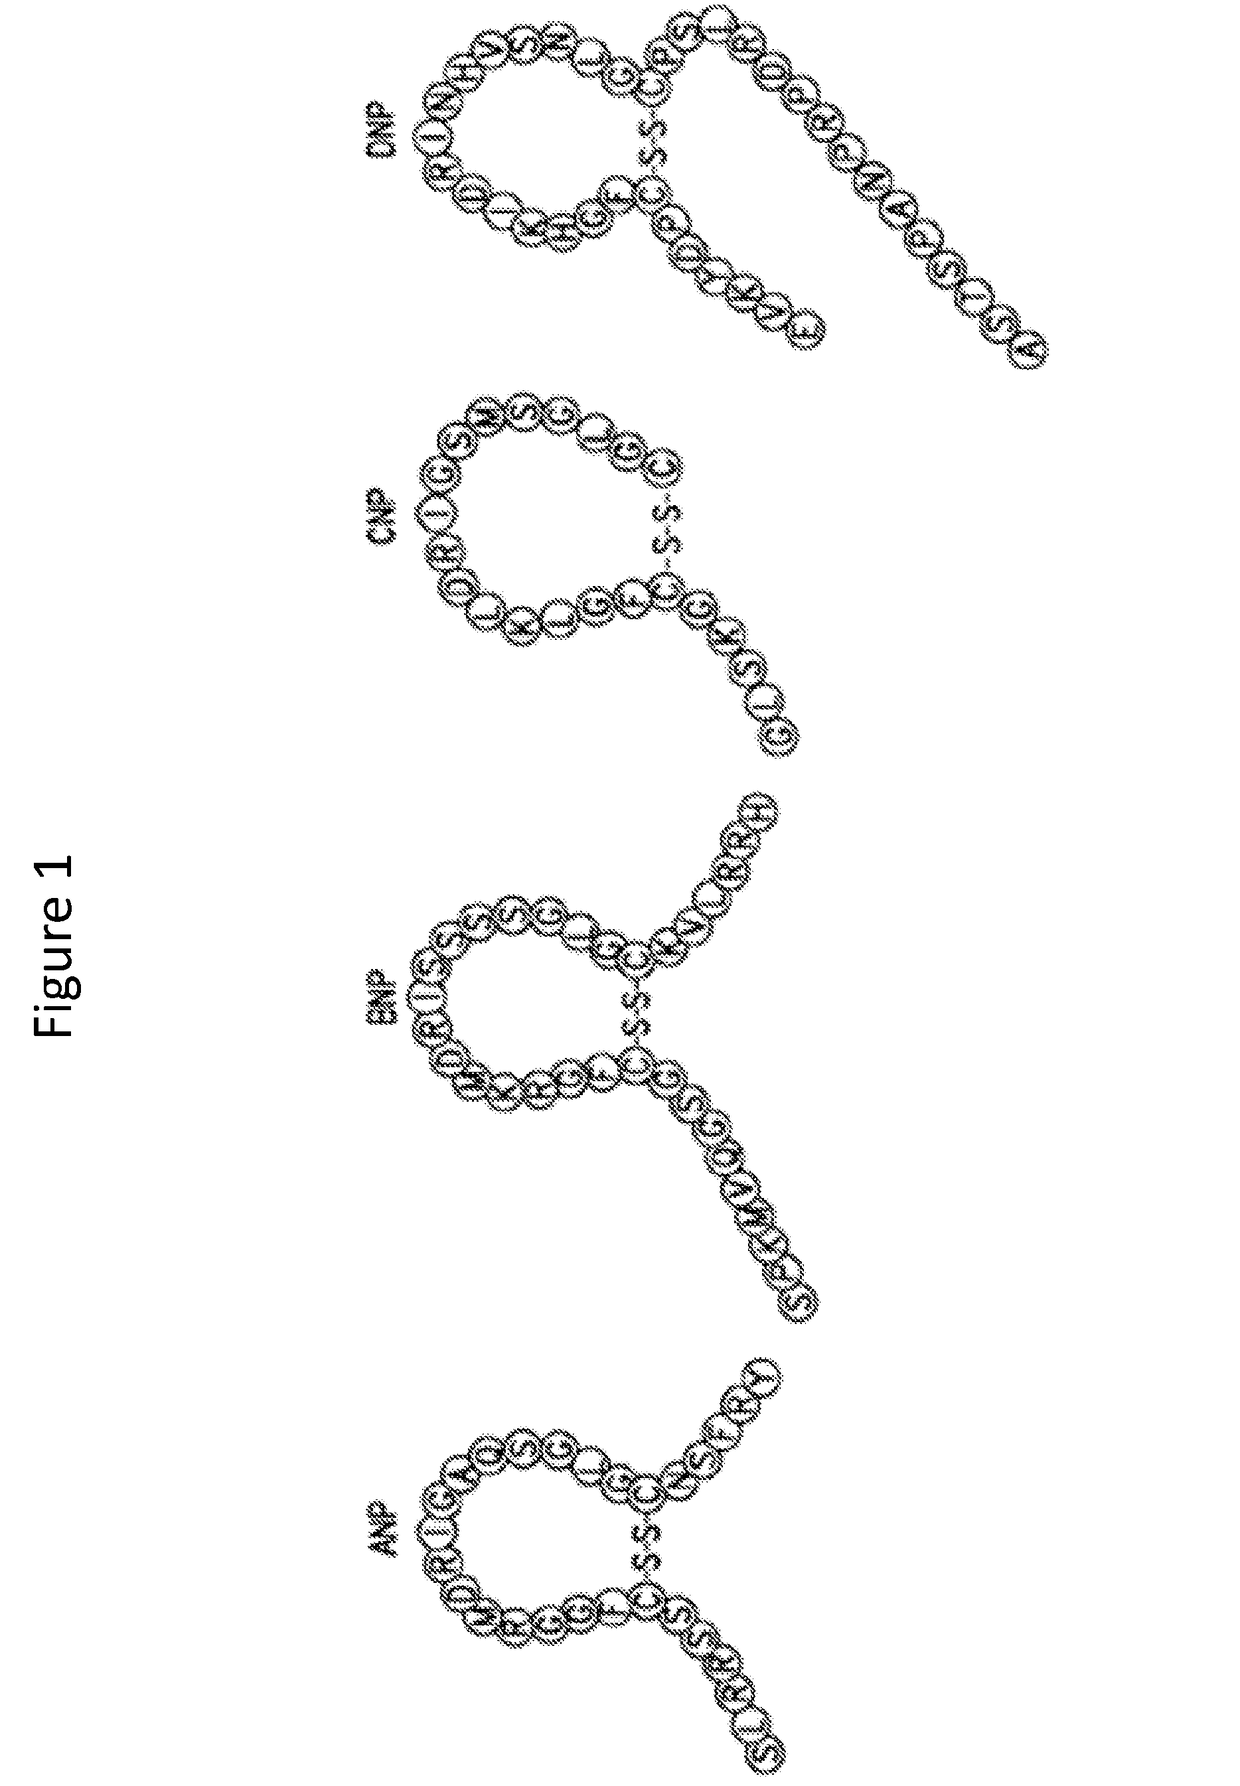 Methods and materials for reducing cysts and kidney weight in mammals with polycystic kidney disease